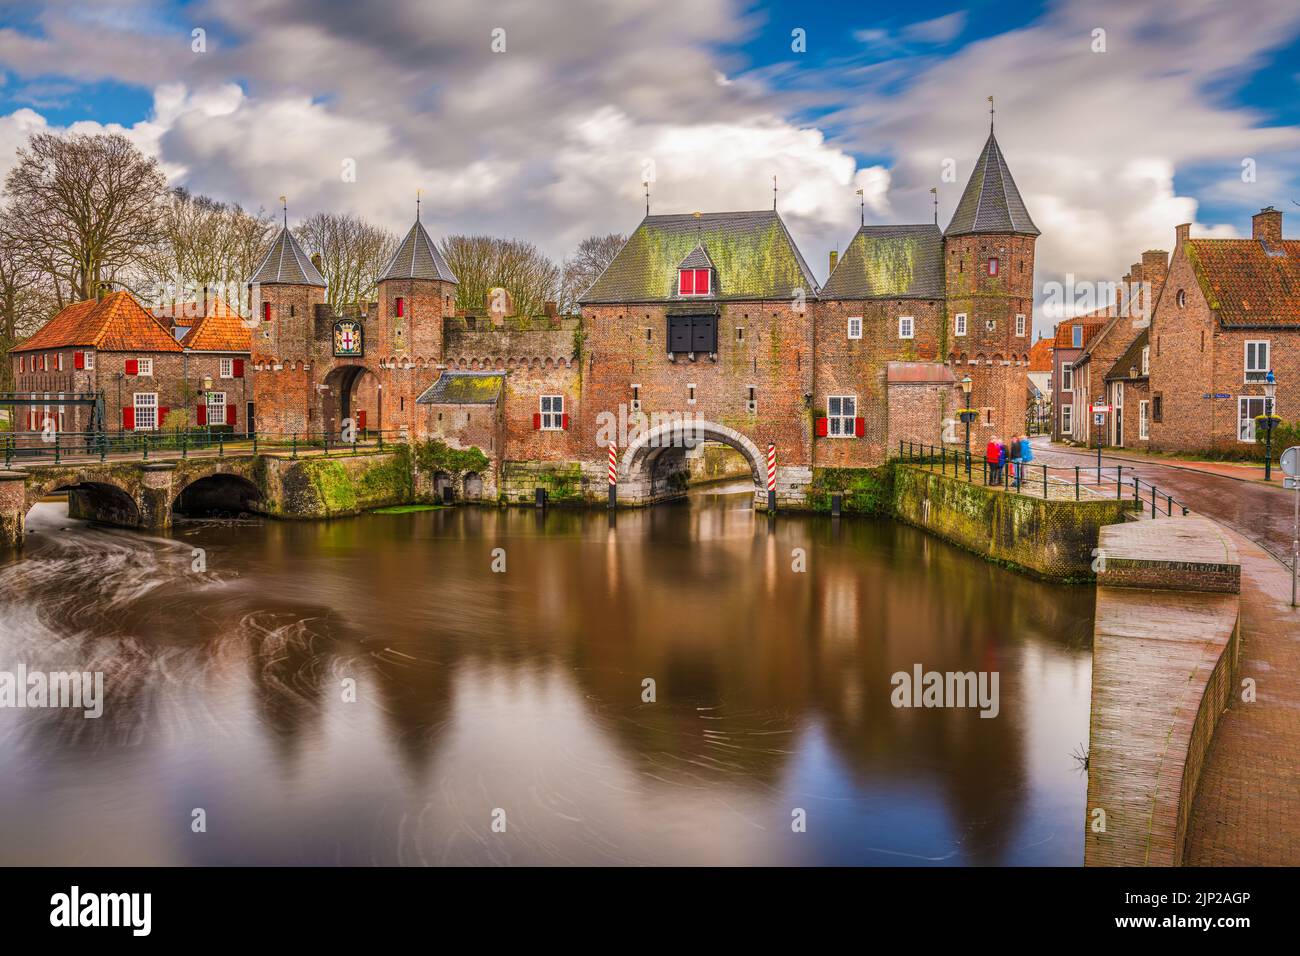 Amersfoort, Netherlands at the historic Koppelpoort in the afternoon. Stock Photo